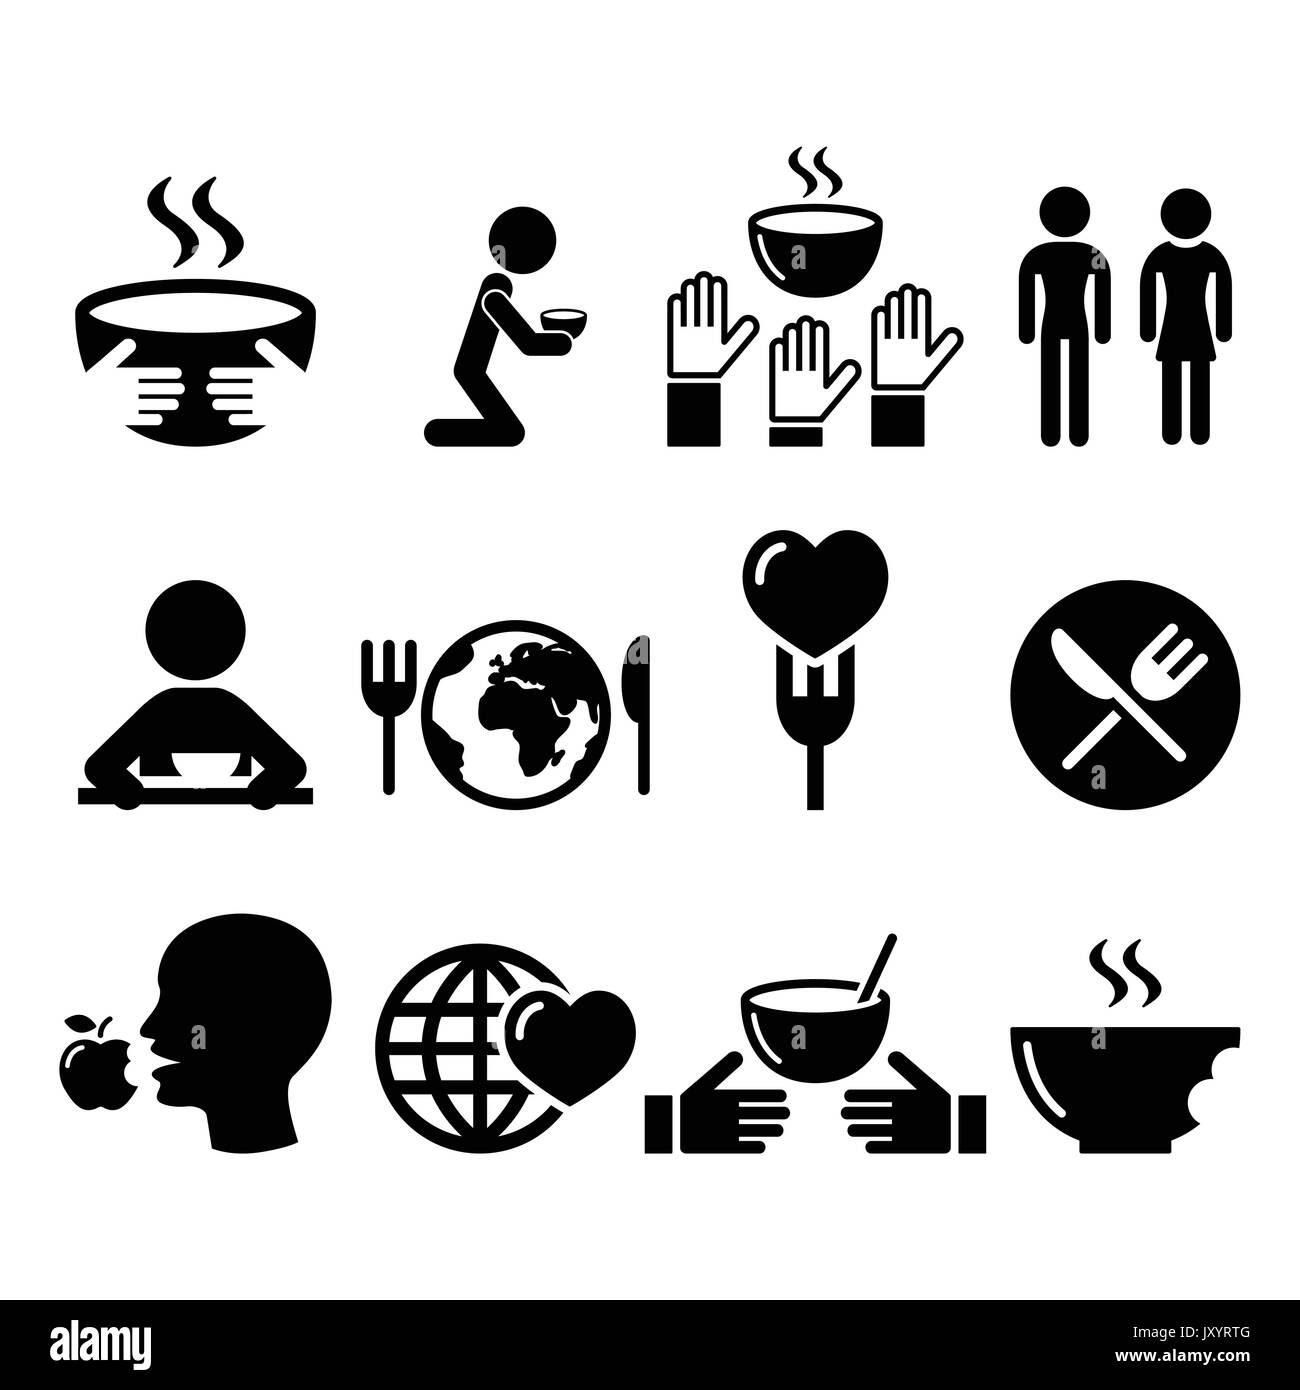 Hunger, starvation, poverty vector icons set Stock Vector